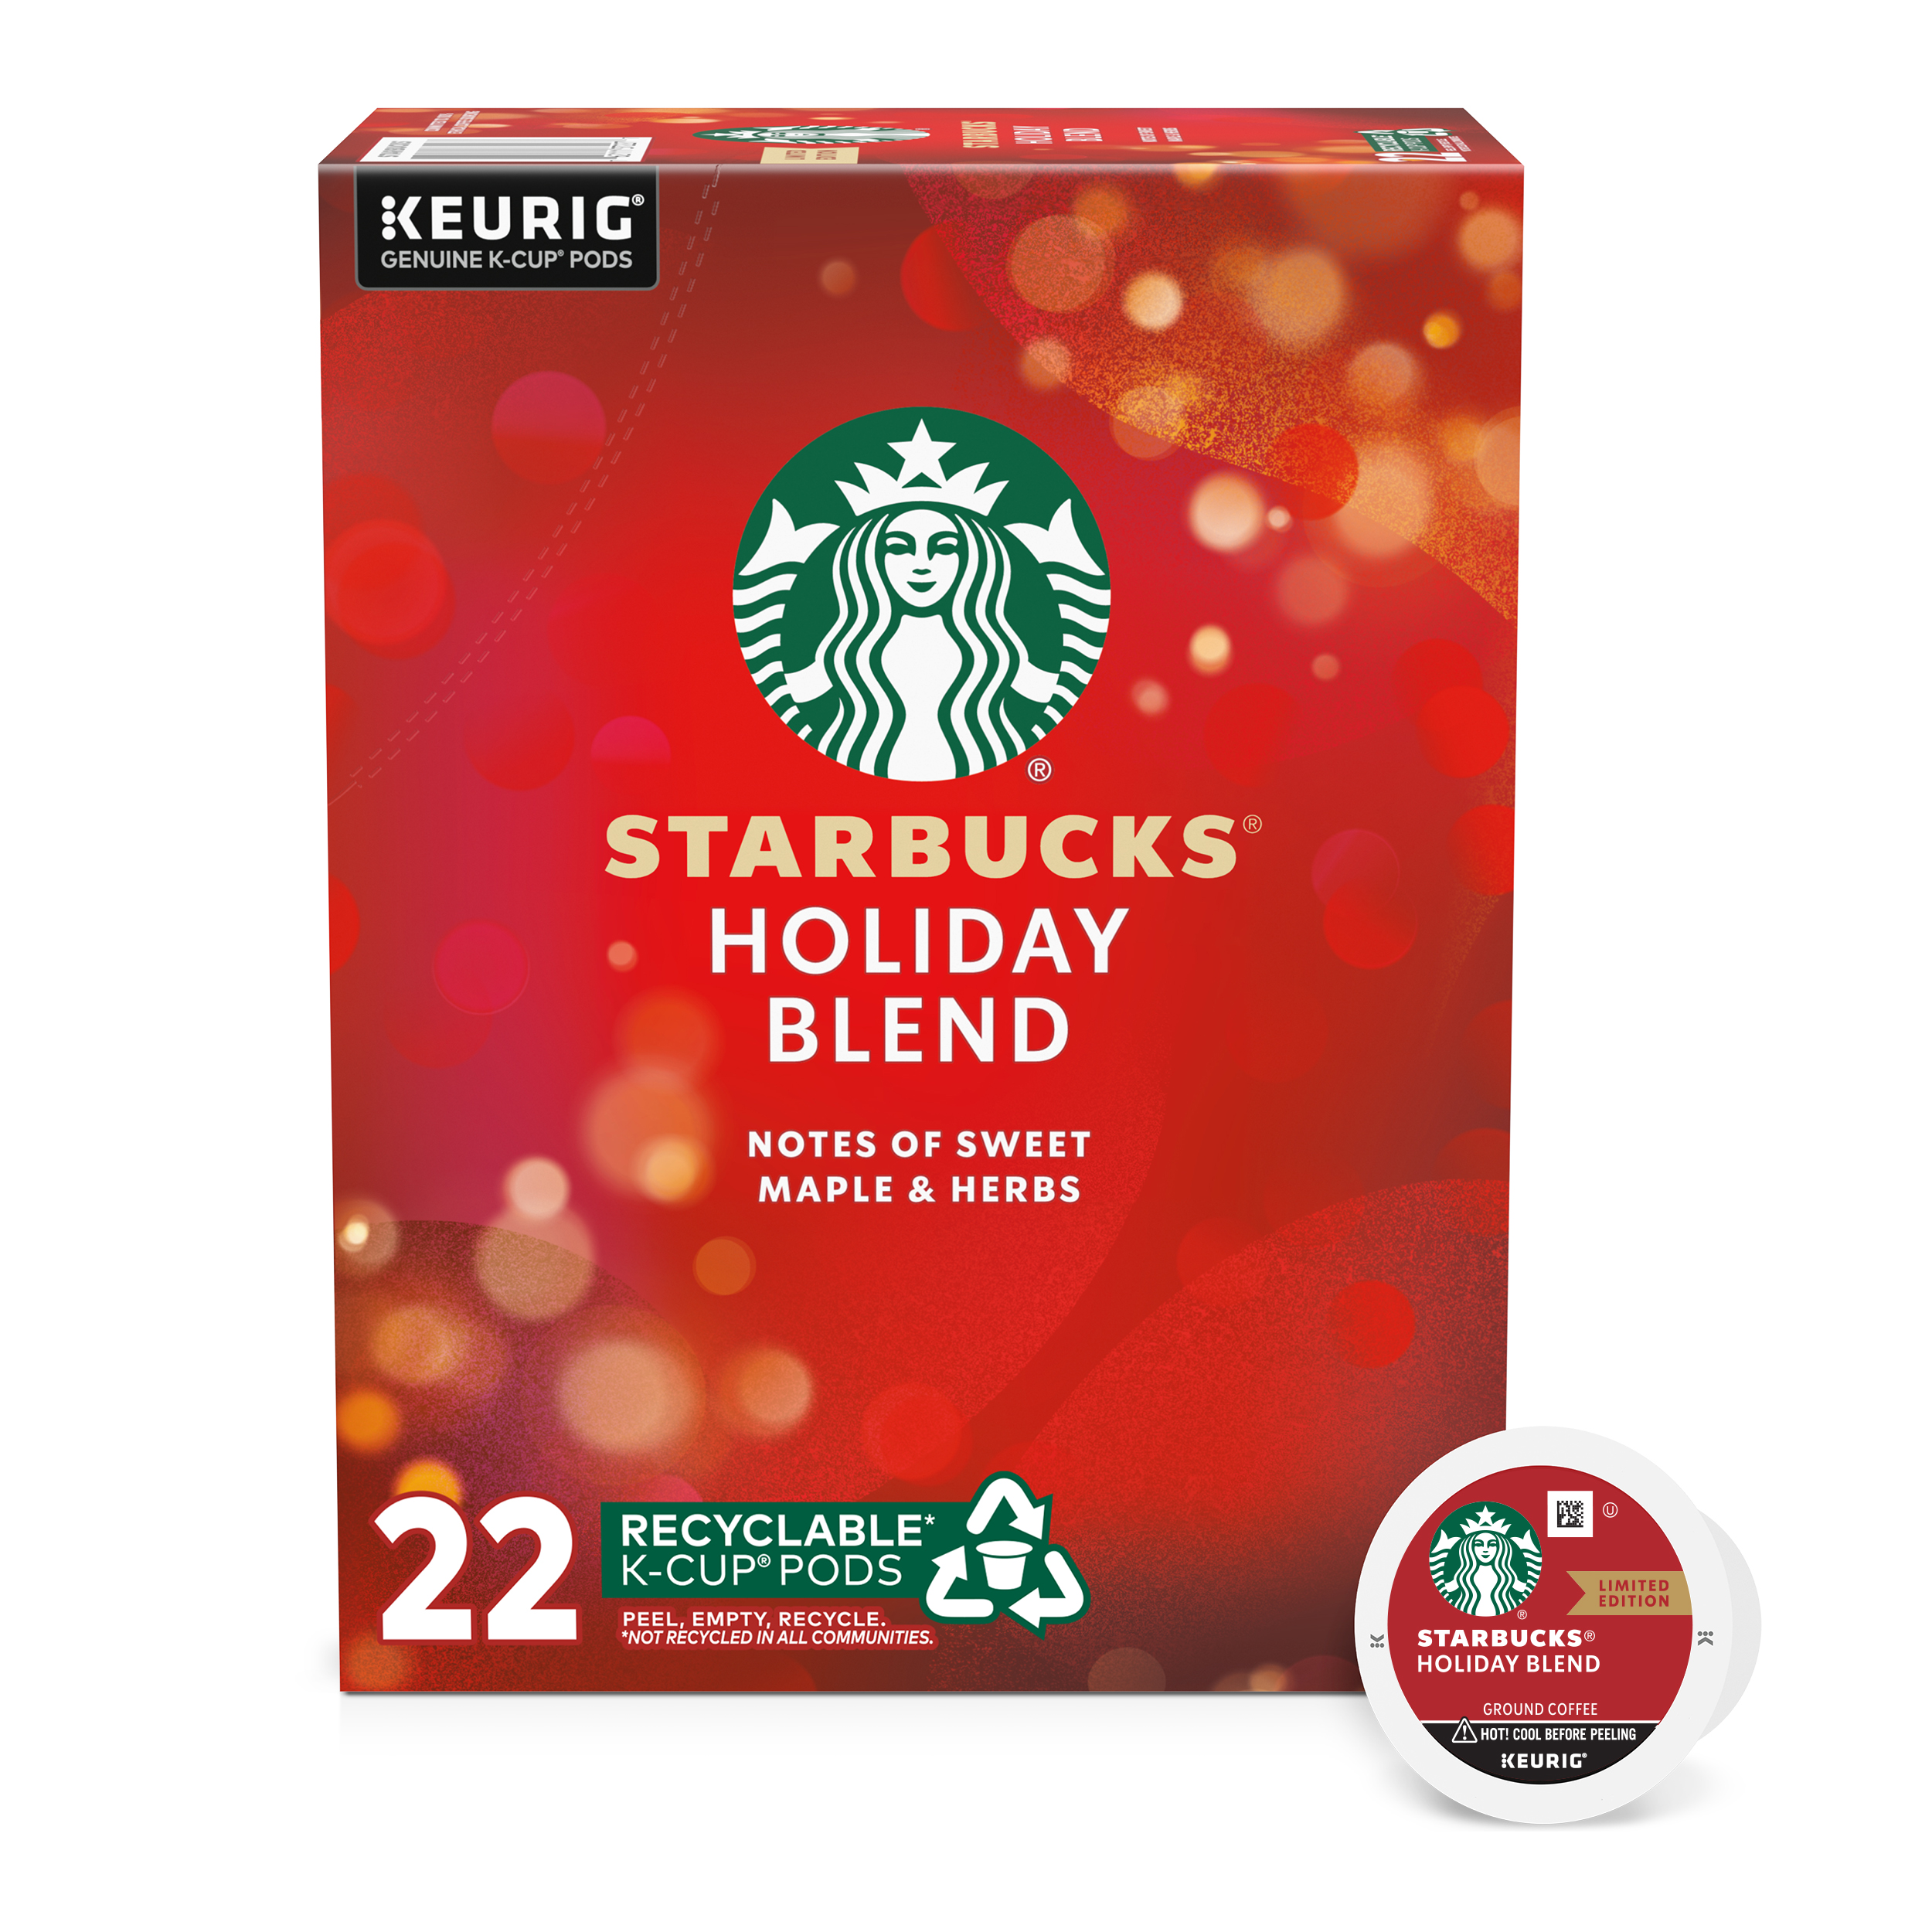 Starbucks Holiday Blend, Medium Roast K-Cup Coffee Pods, 22 Count K Cups - image 1 of 9